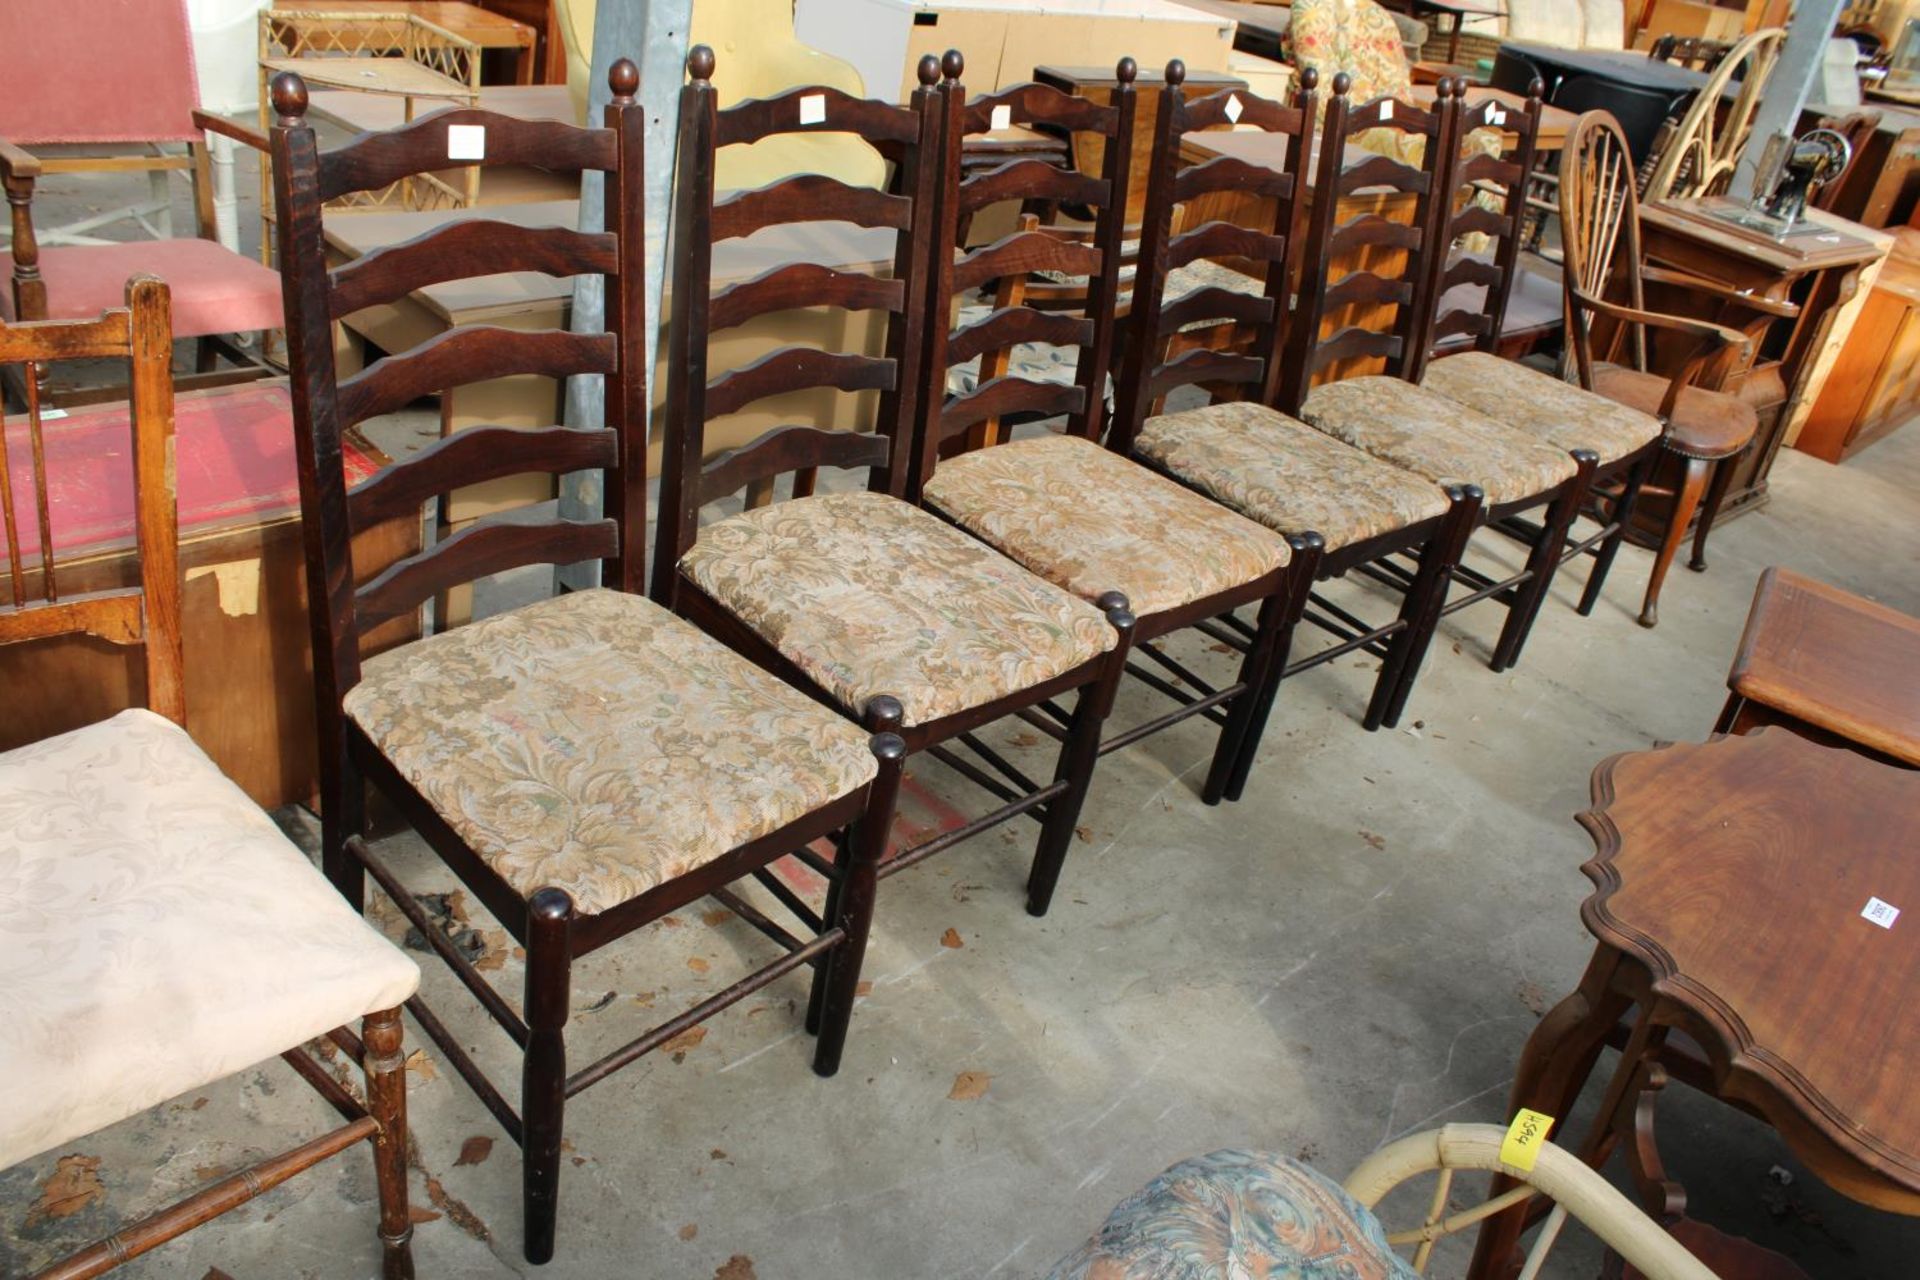 A SET OF SIX MODERN LADDER-BACK DINING CHAIRS